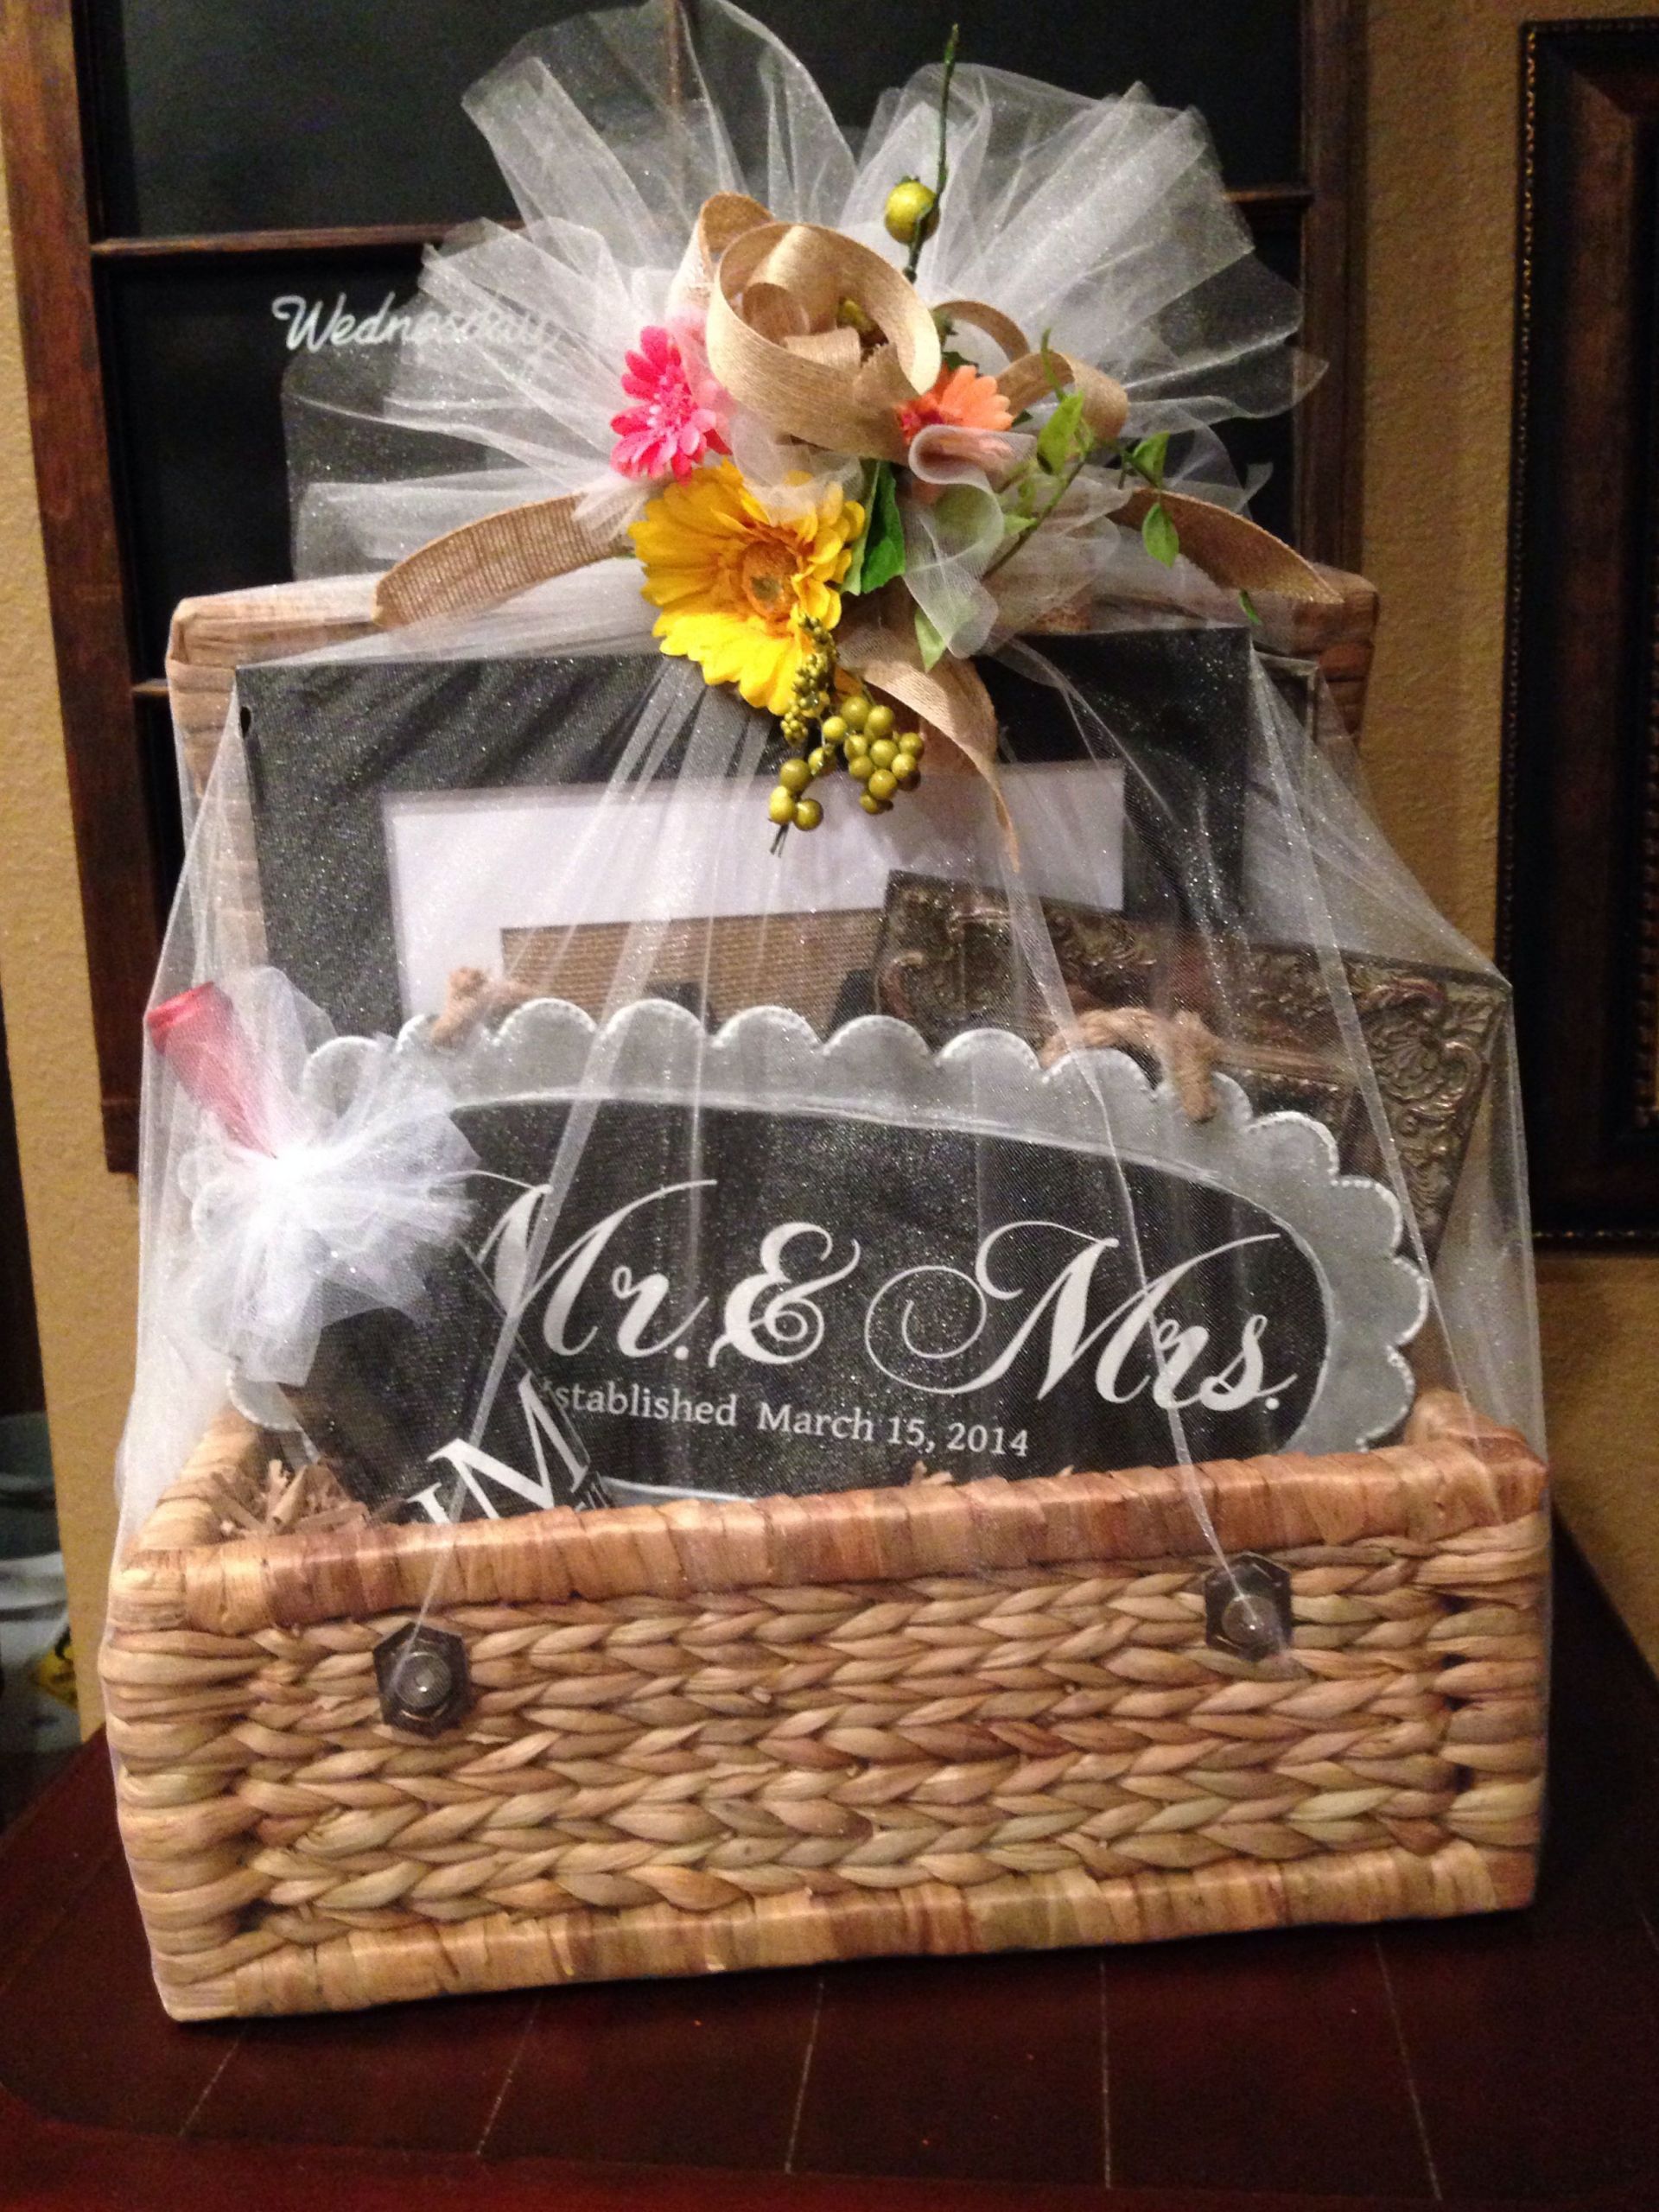 Personalized Gift Basket Ideas
 Wedding t basket filed with personalized ts made